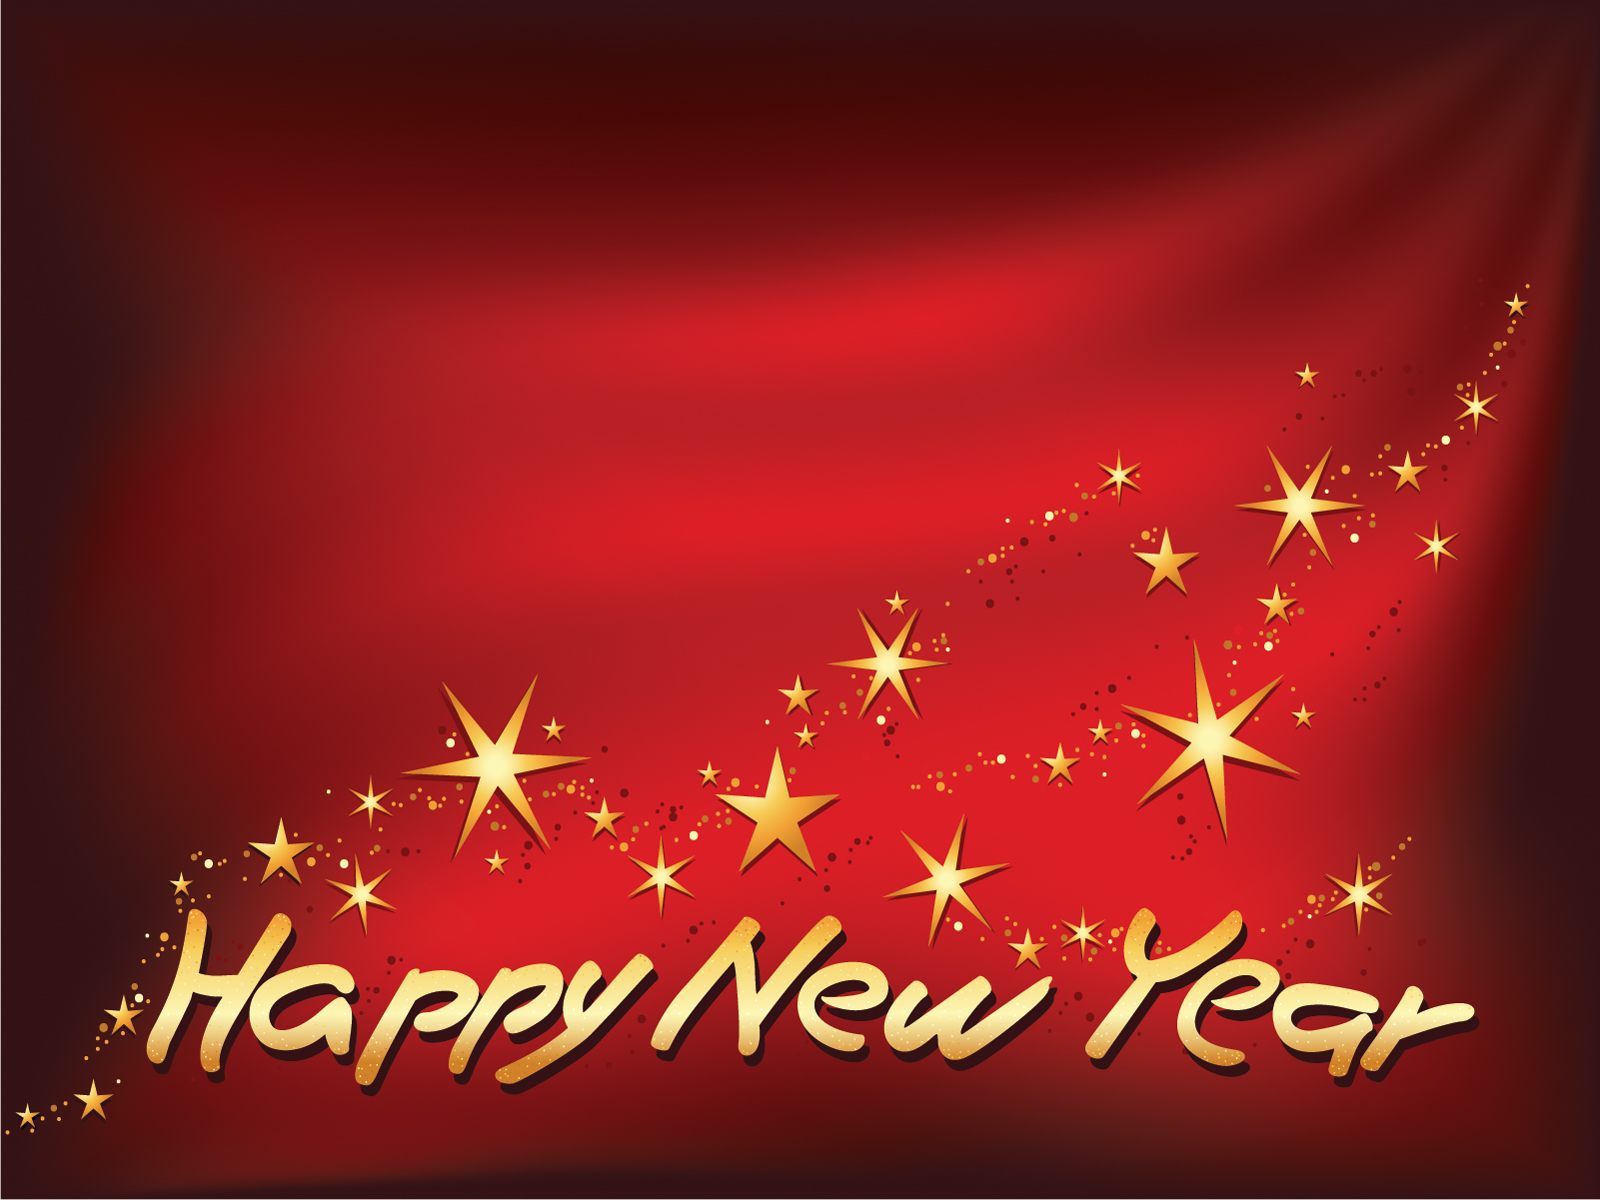 Happy New Year Theme With Stars Powerpoint Templates Arts Black Christmas Red Free Ppt Backgrounds And Templates